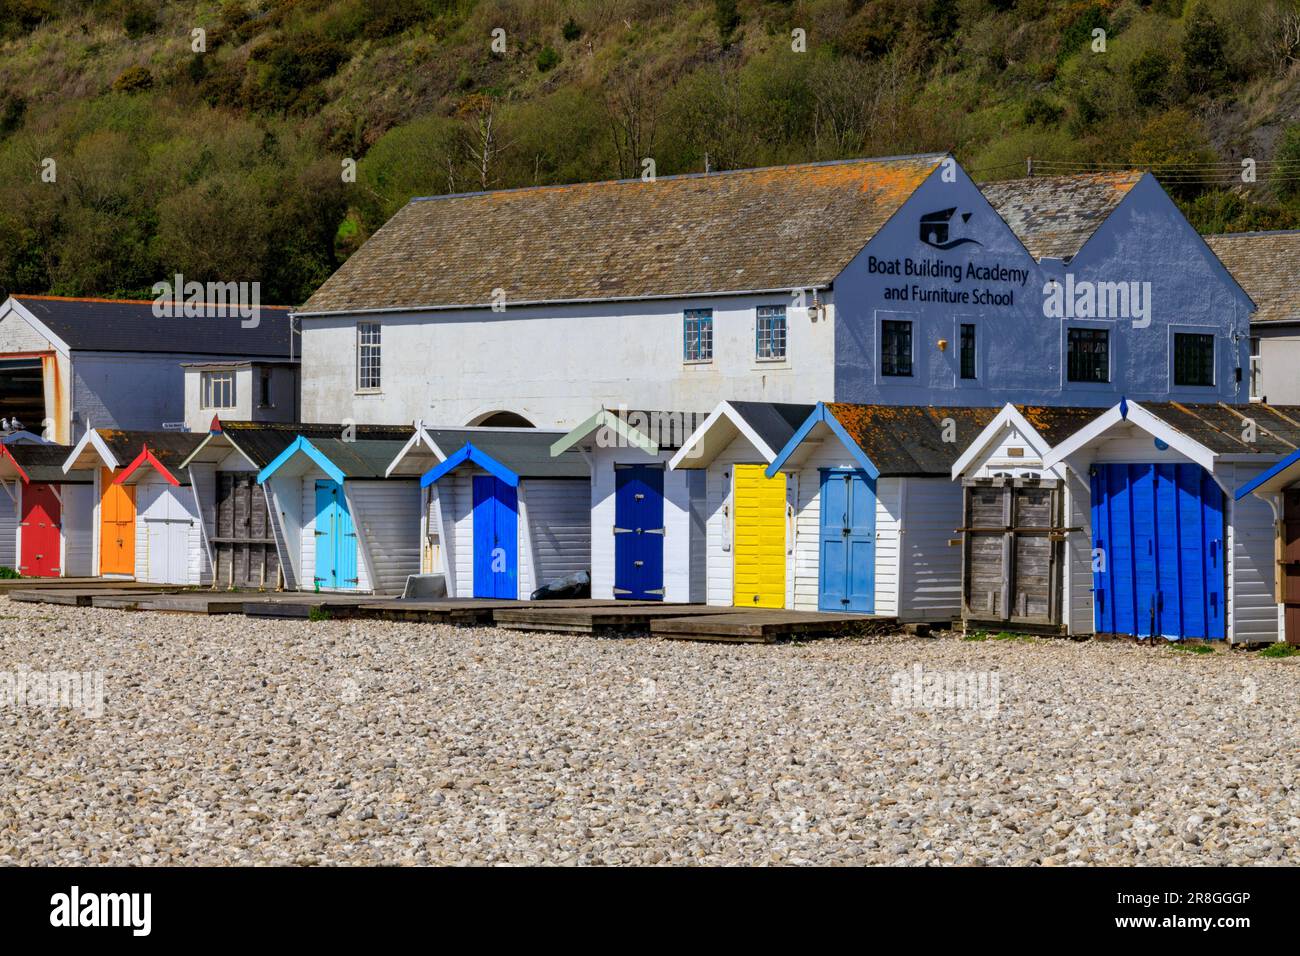 Colourful beach huts in front of the Boat Building Academy and Furniture School in Lyme Regis on the Jurassic Coast, Dorset, England, UK Stock Photo